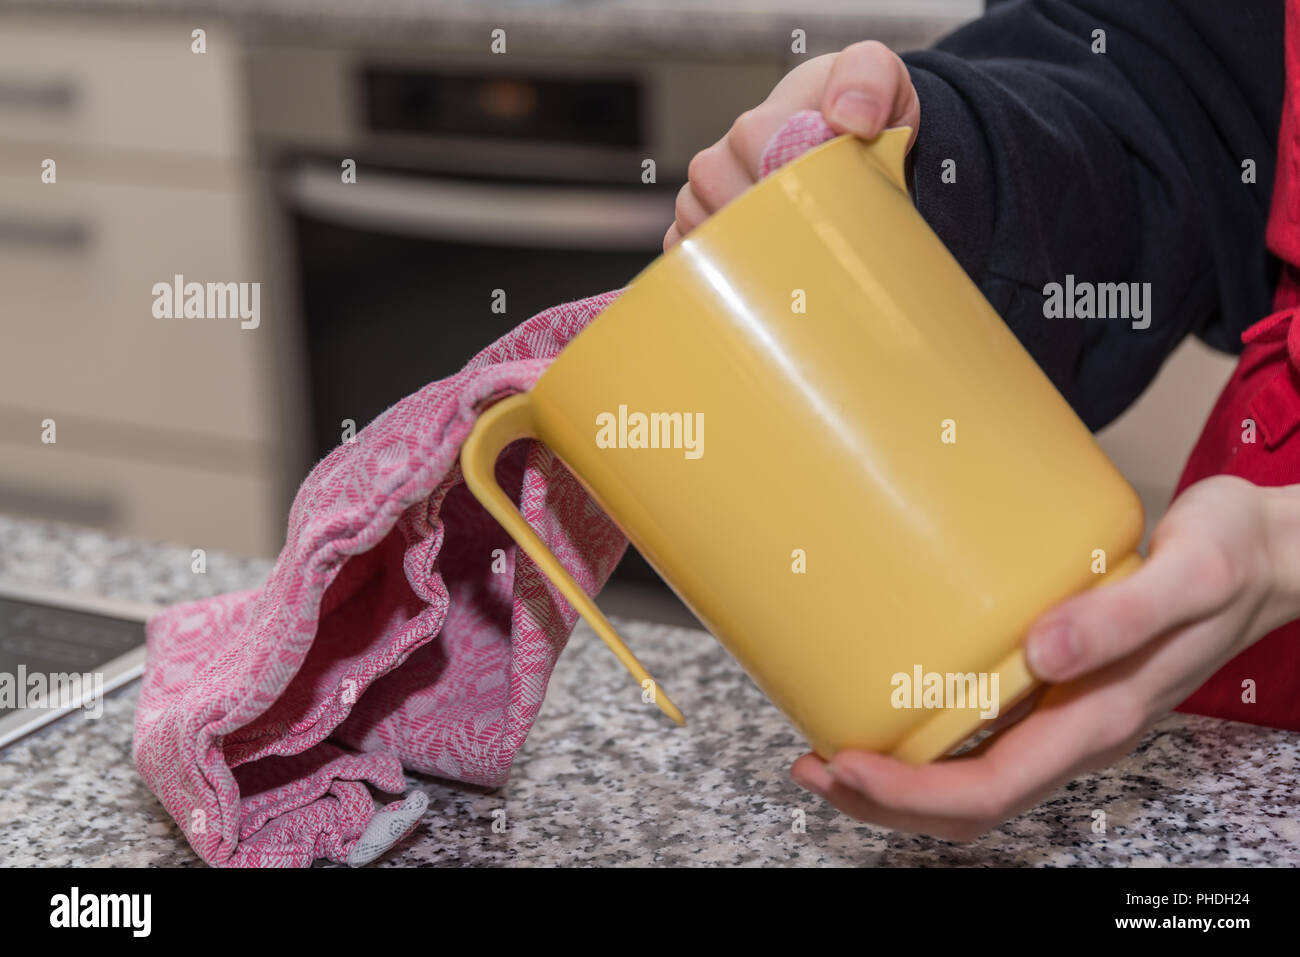 Kitchenware is dried - close-up Stock Photo